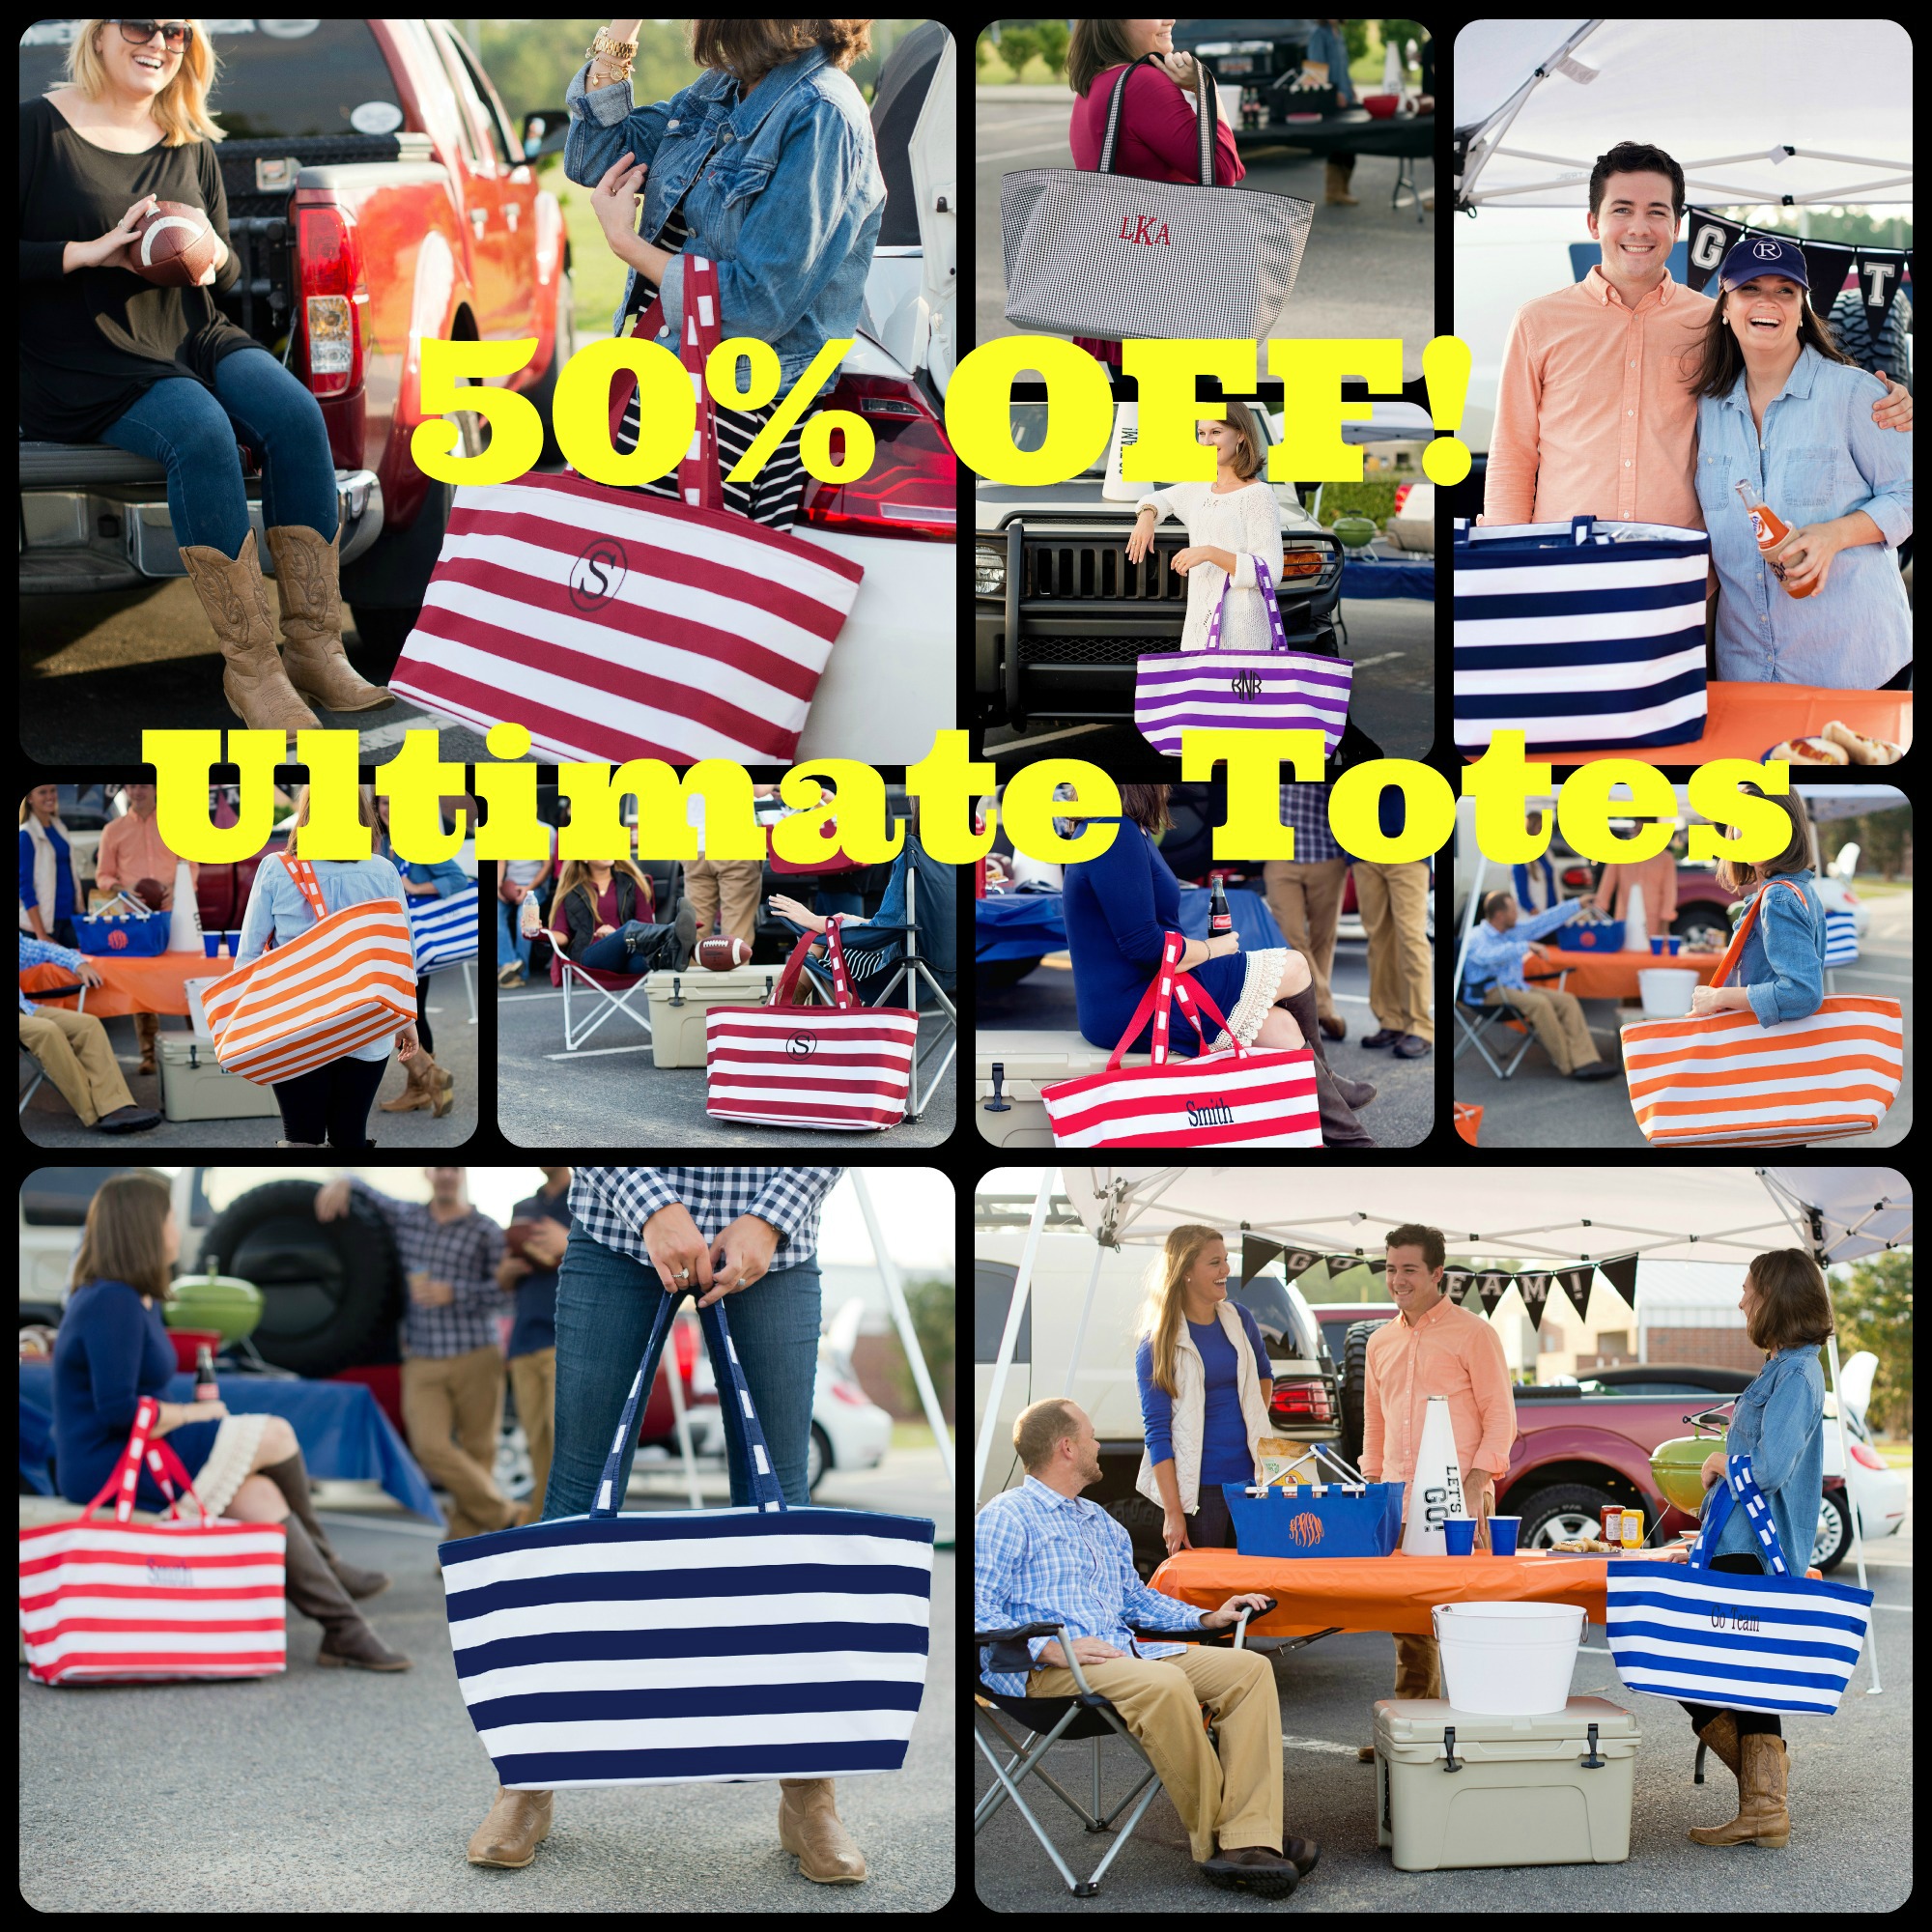 50% Off Ultimate Totes, farmers market tote, utility tote, striped tote, houndstooth tote bags, tote bags, striped tote bags,